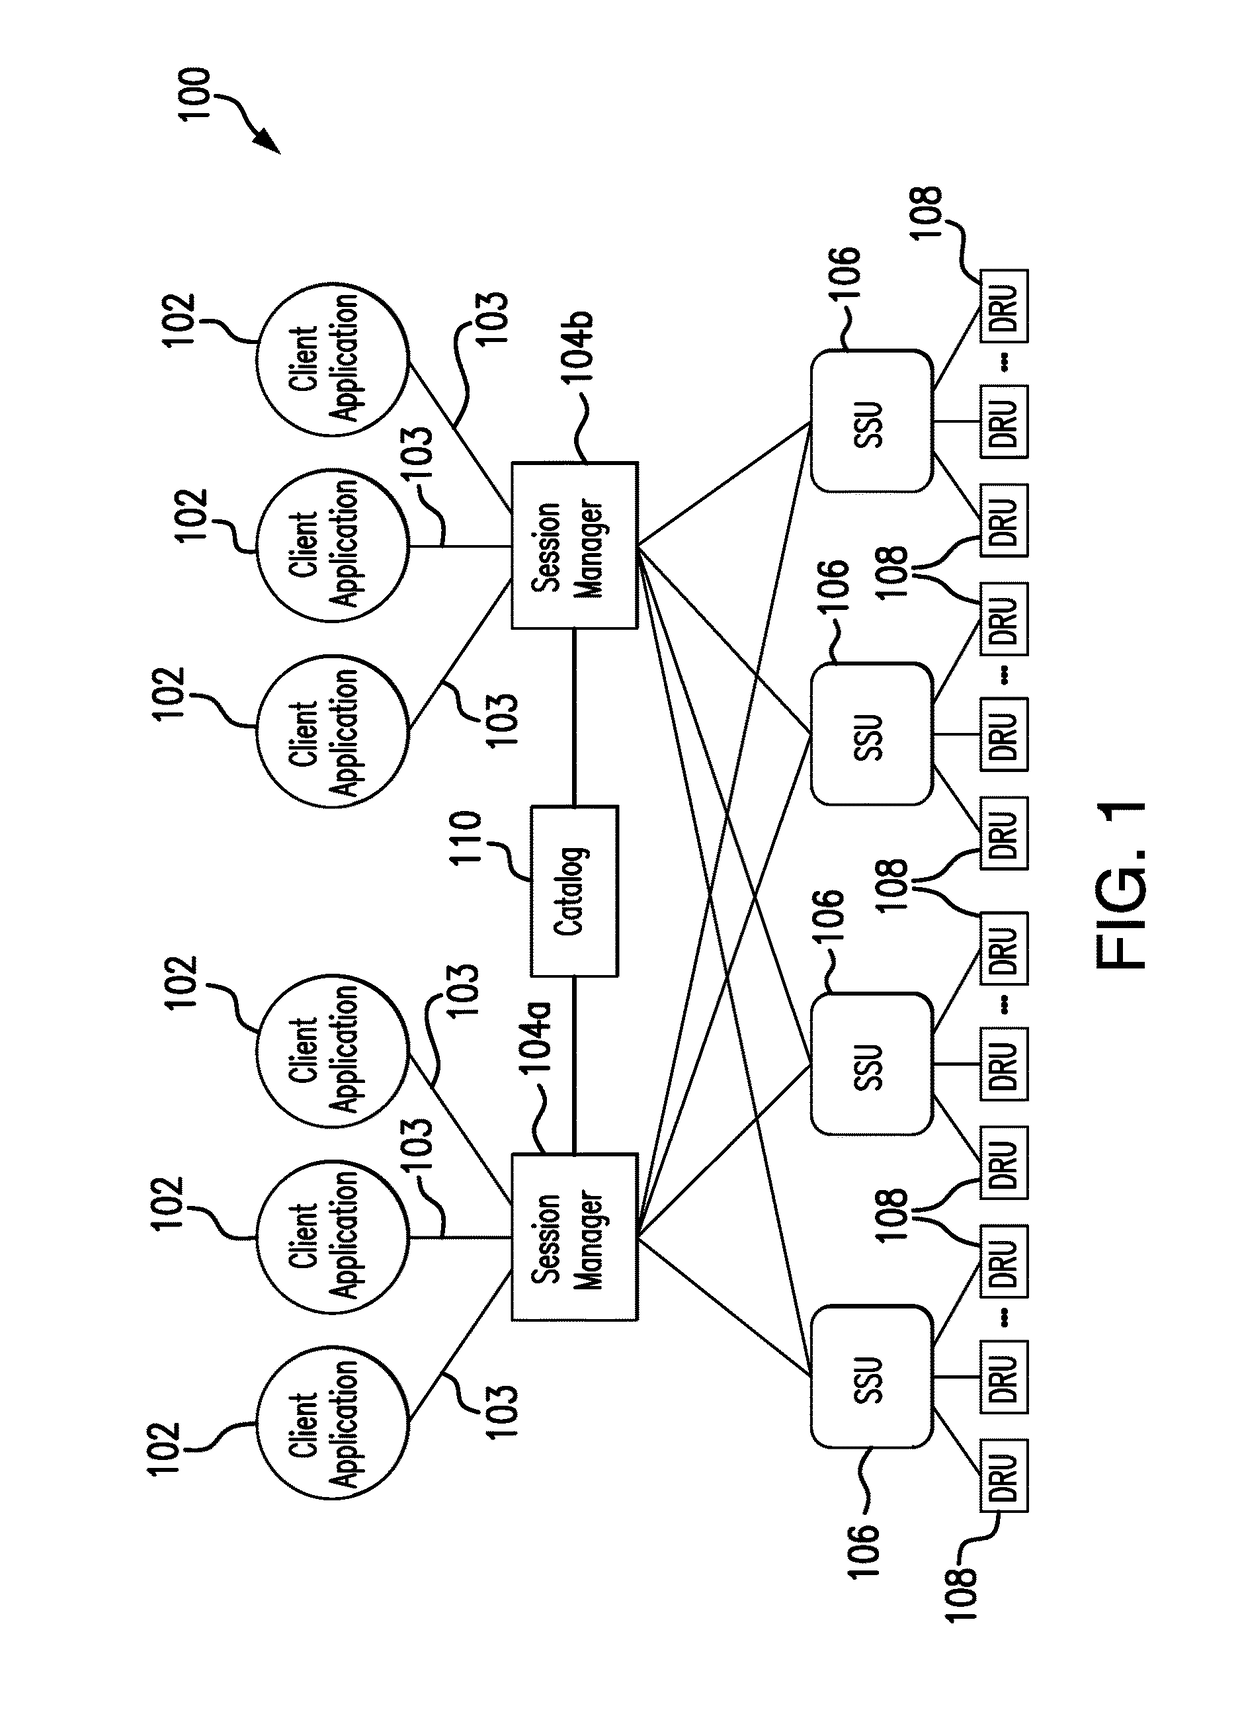 Optimized merge-sorting of data retrieved from parallel storage units